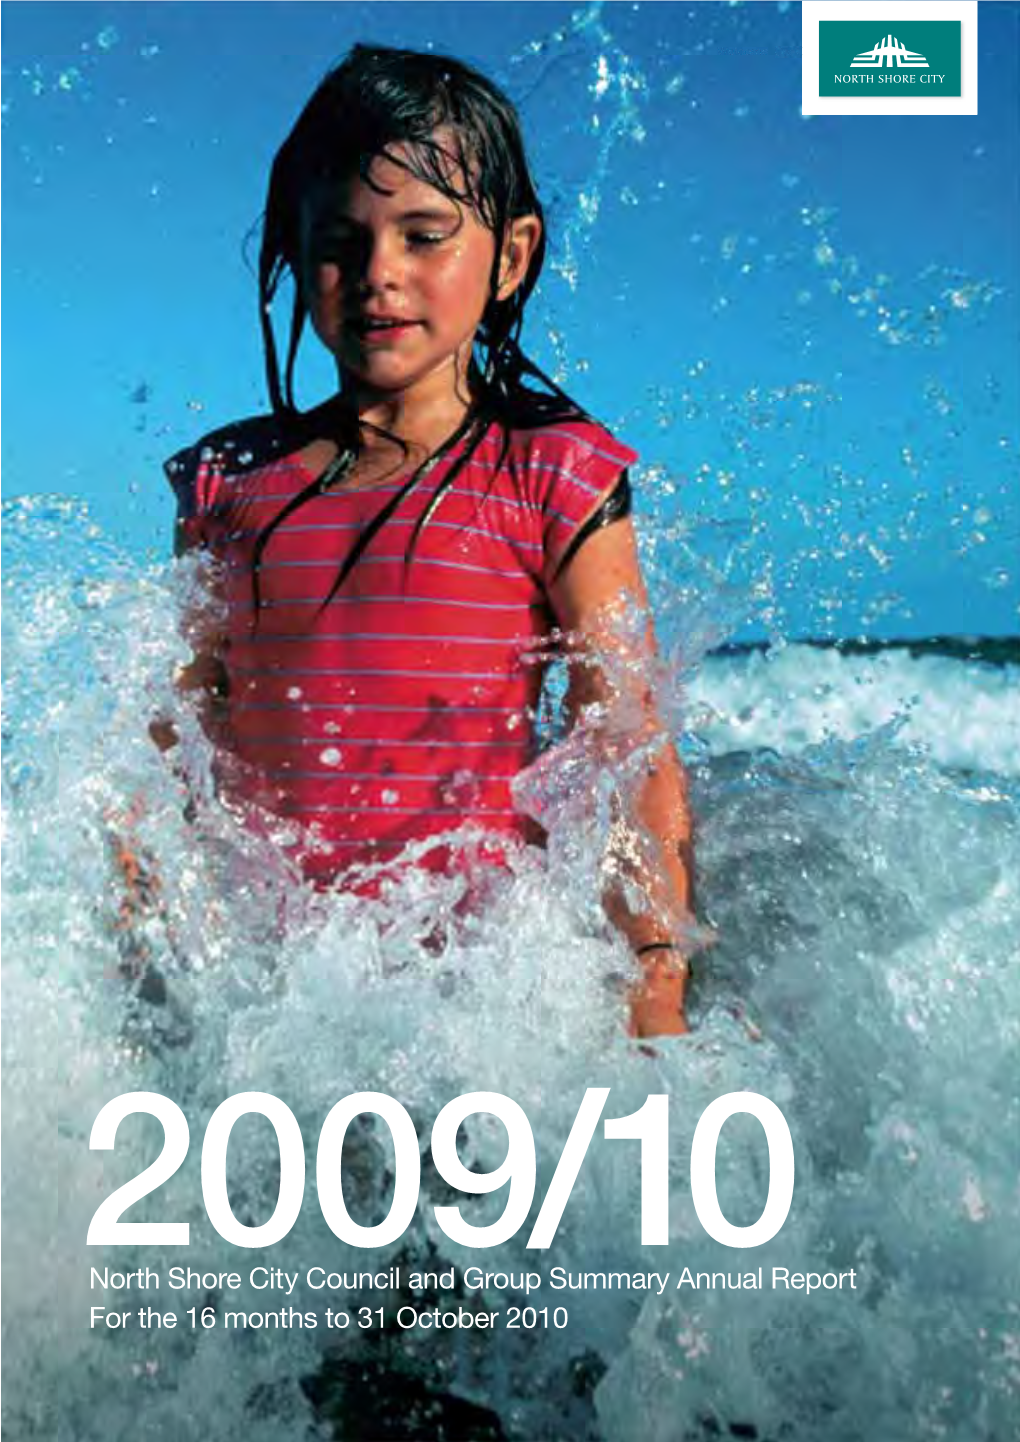 North Shore City Council Annual Report 2009-2010 Summary Document